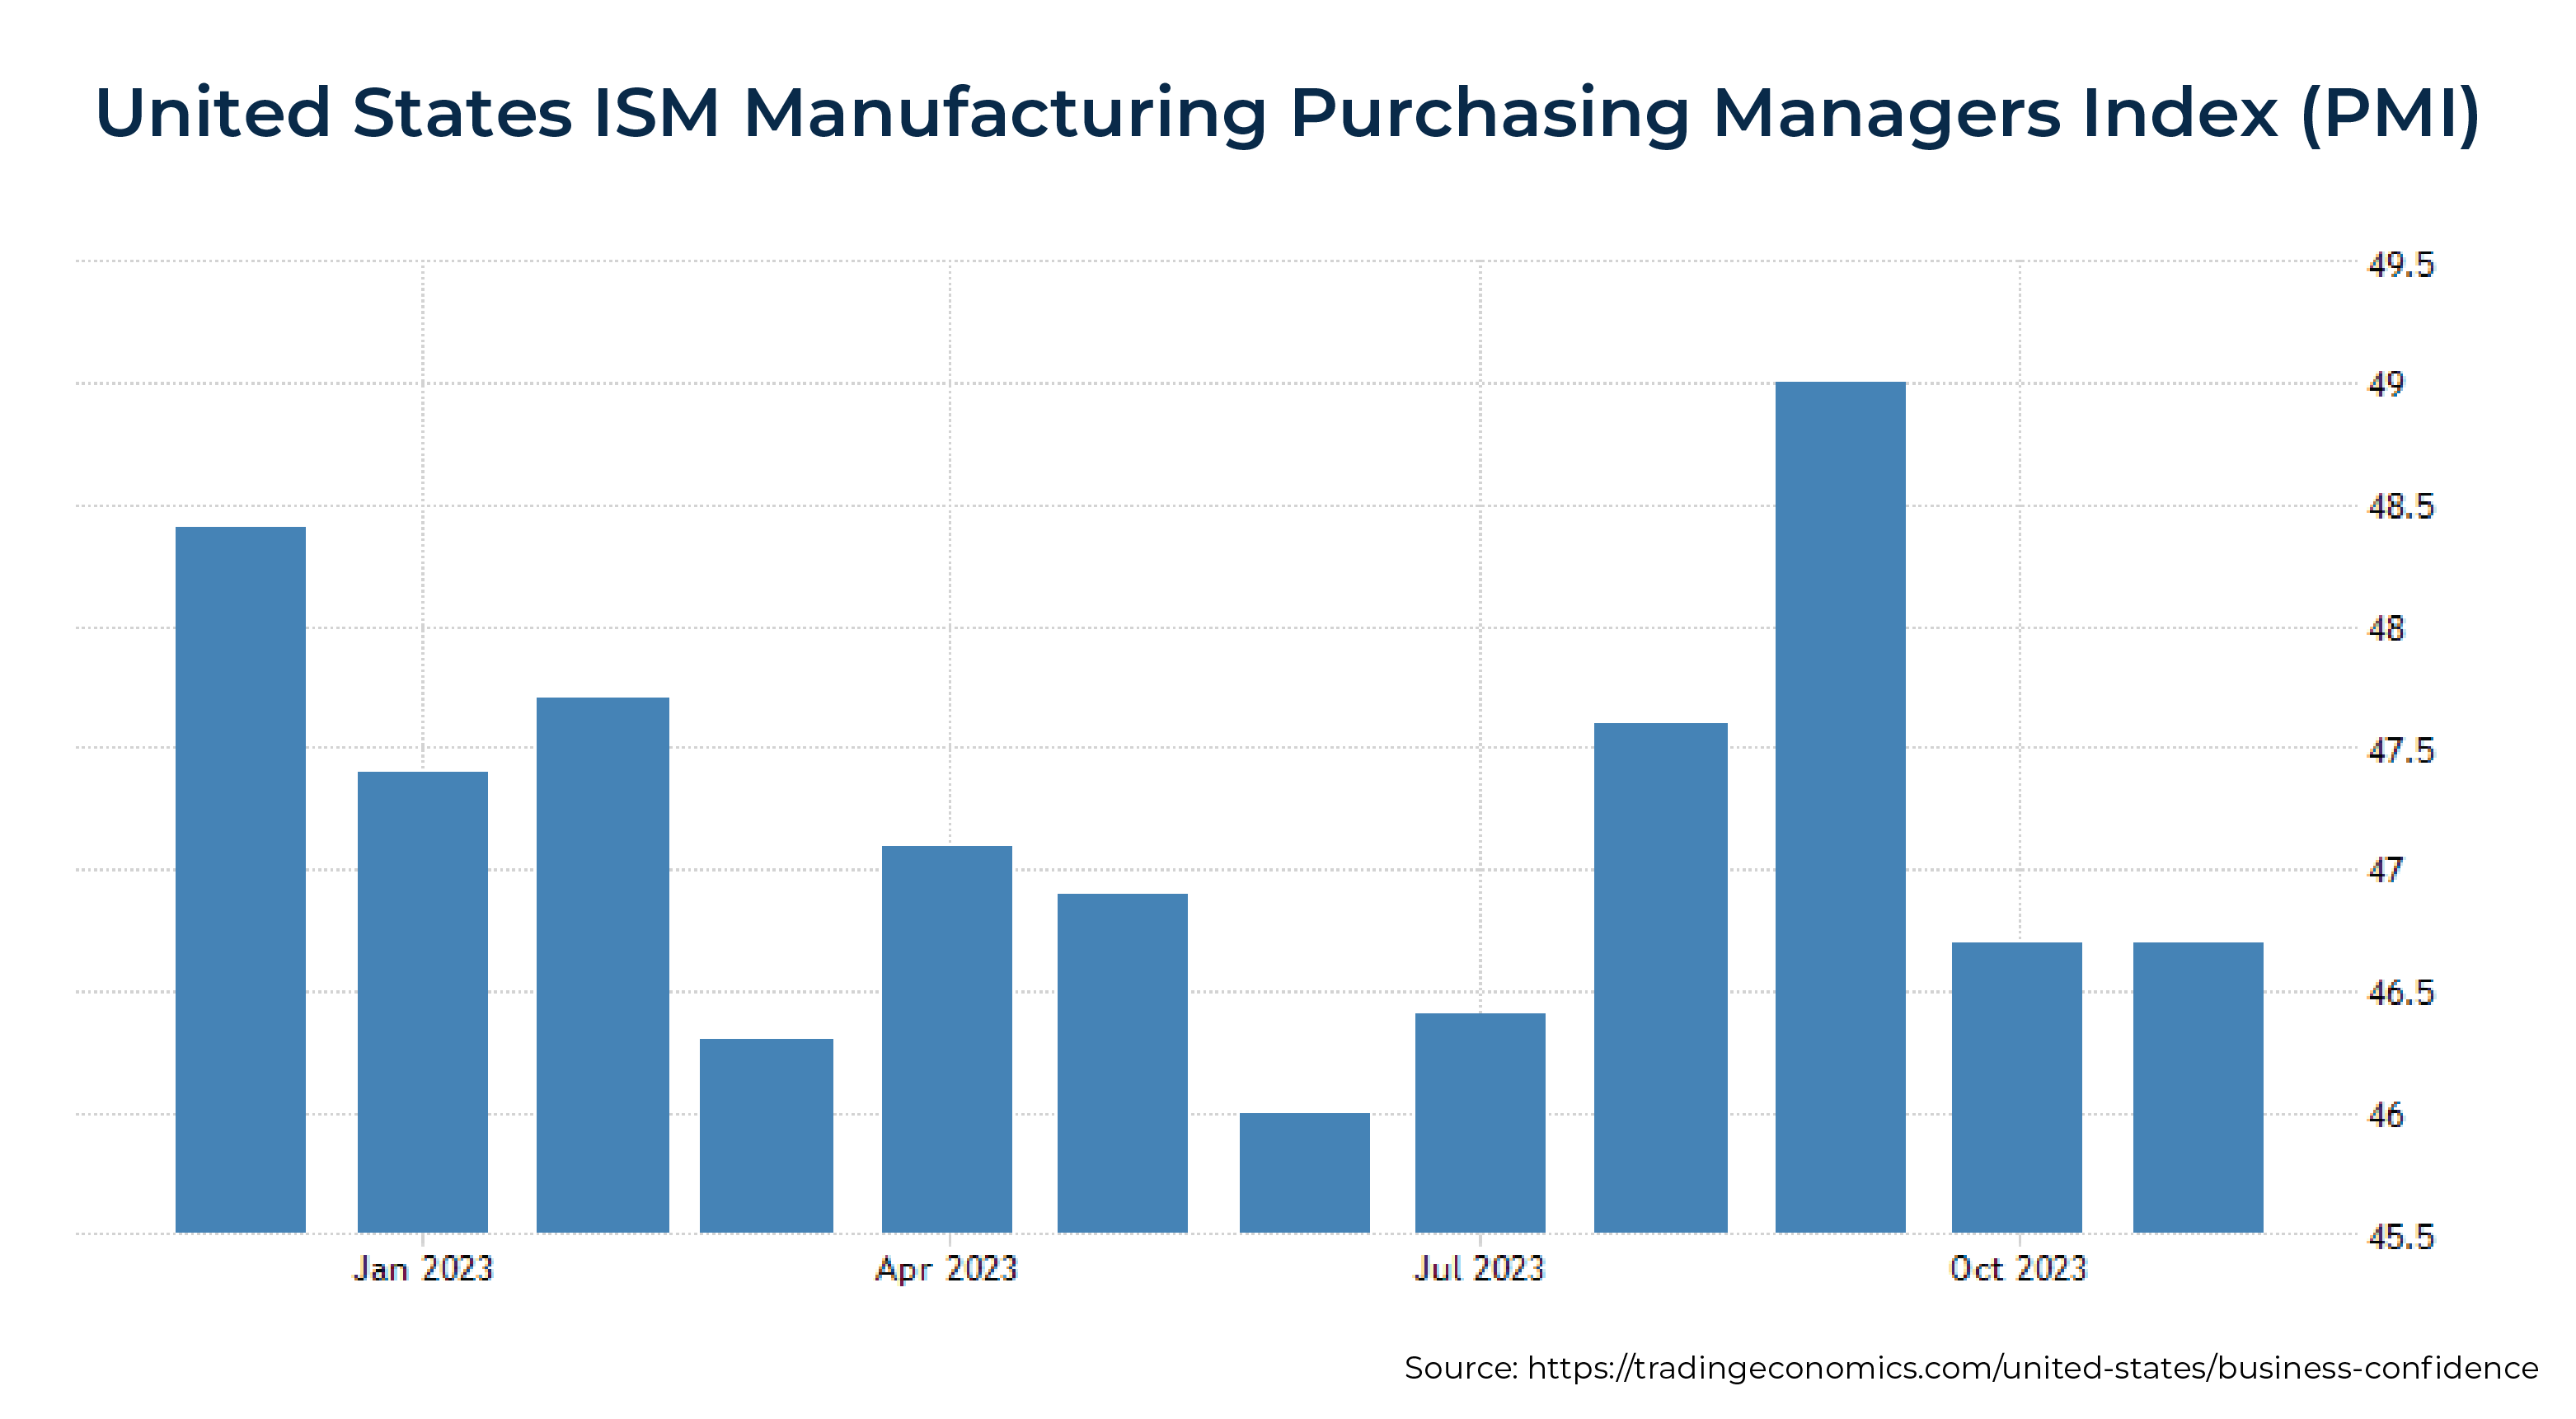 United States ISM Manufacturing Purchasing Managers Index (PMI)